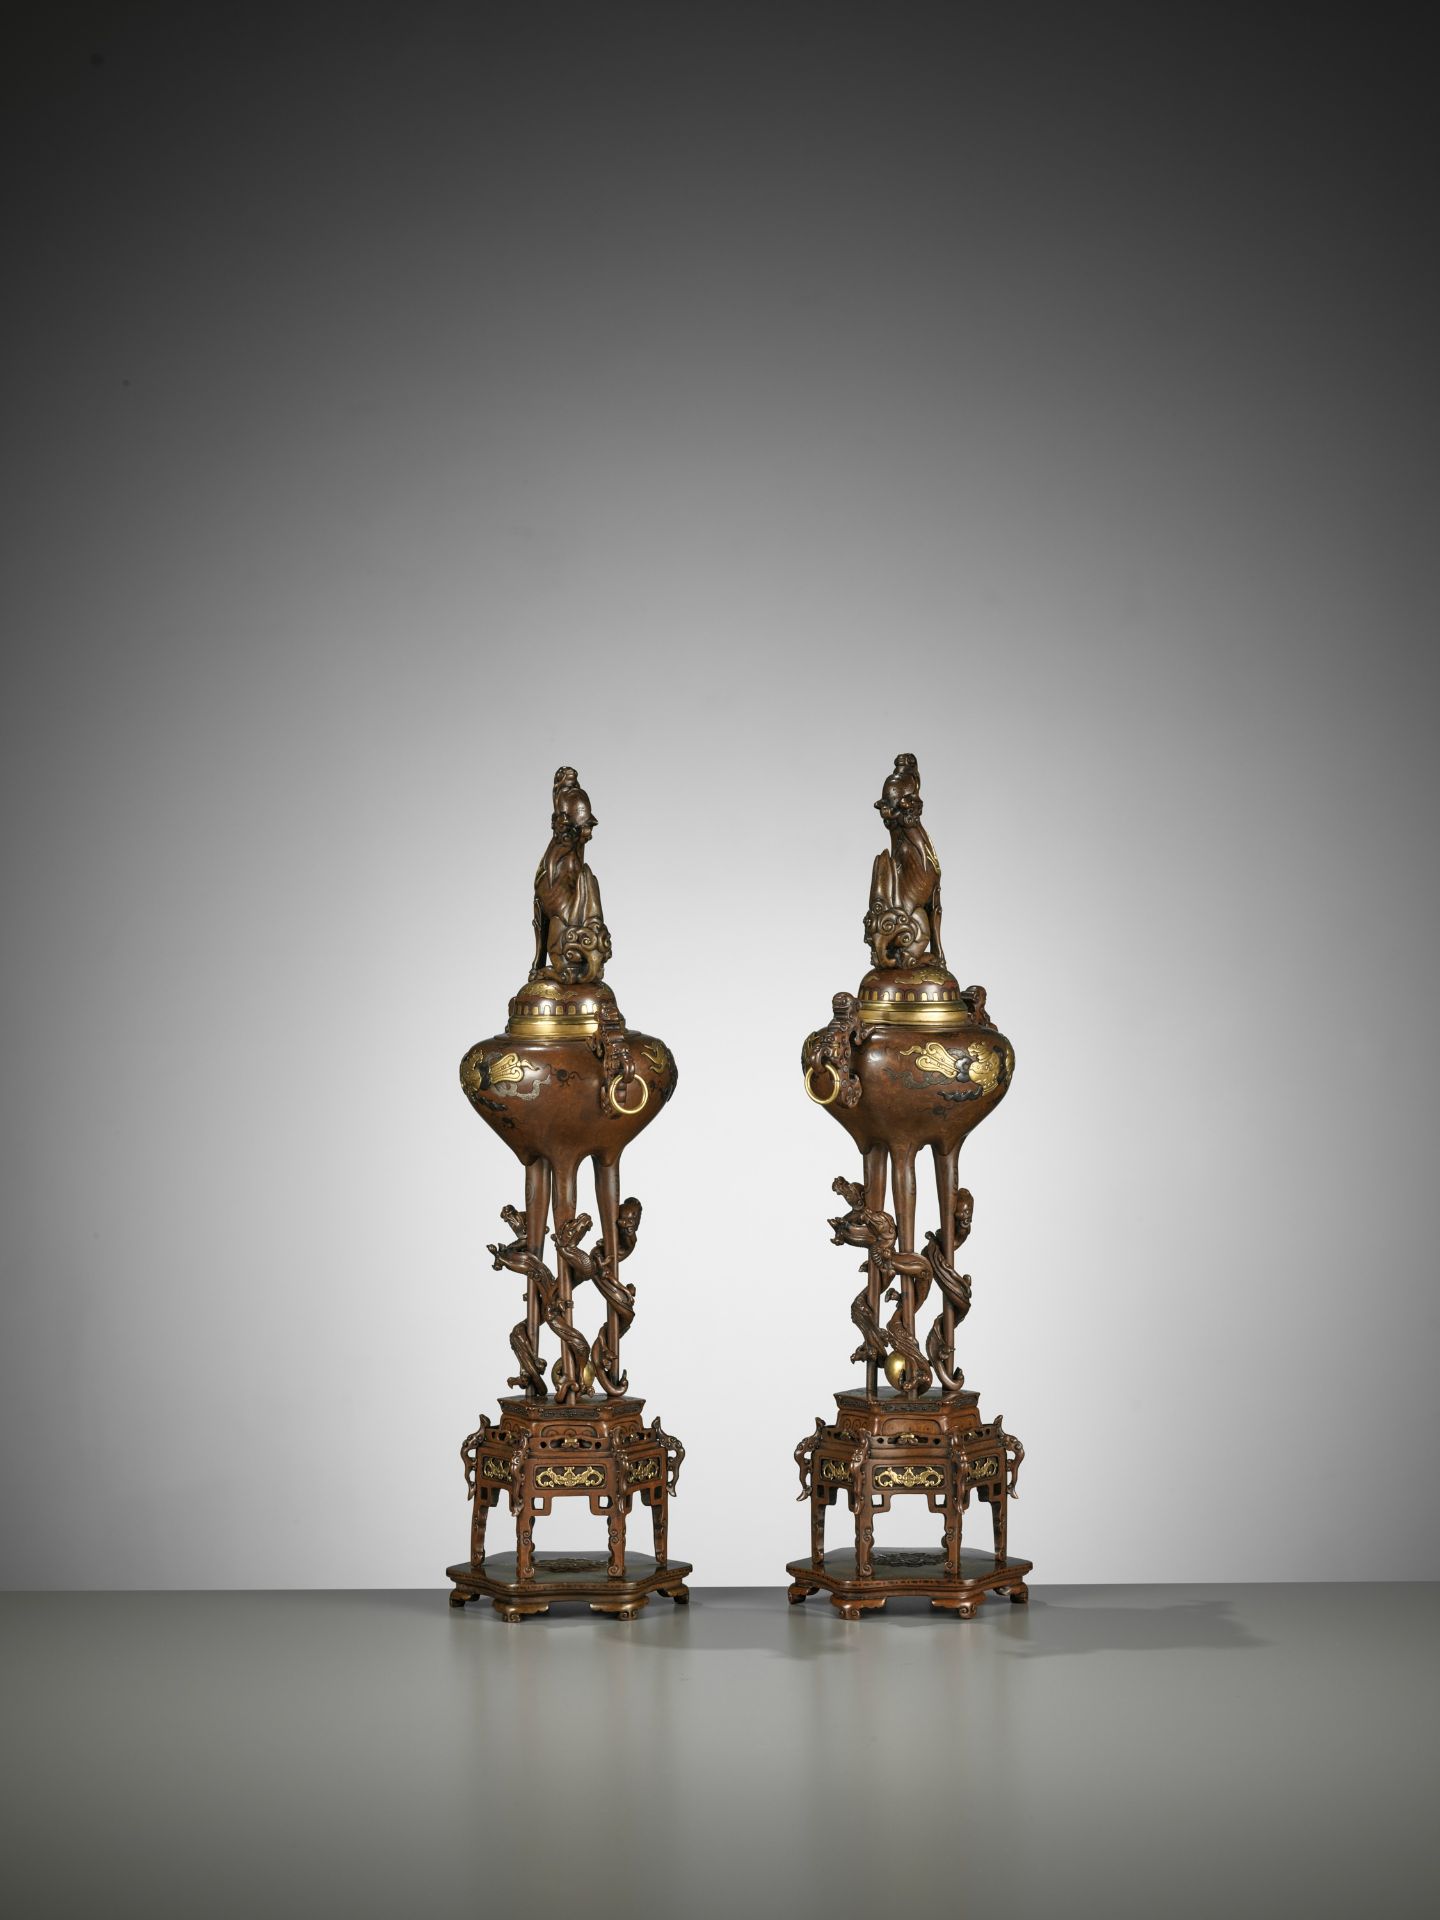 A PAIR OF SUPERB GOLD-INLAID BRONZE 'MYTHICAL BEASTS' KORO (INCENSE BURNERS) AND COVERS - Image 13 of 20